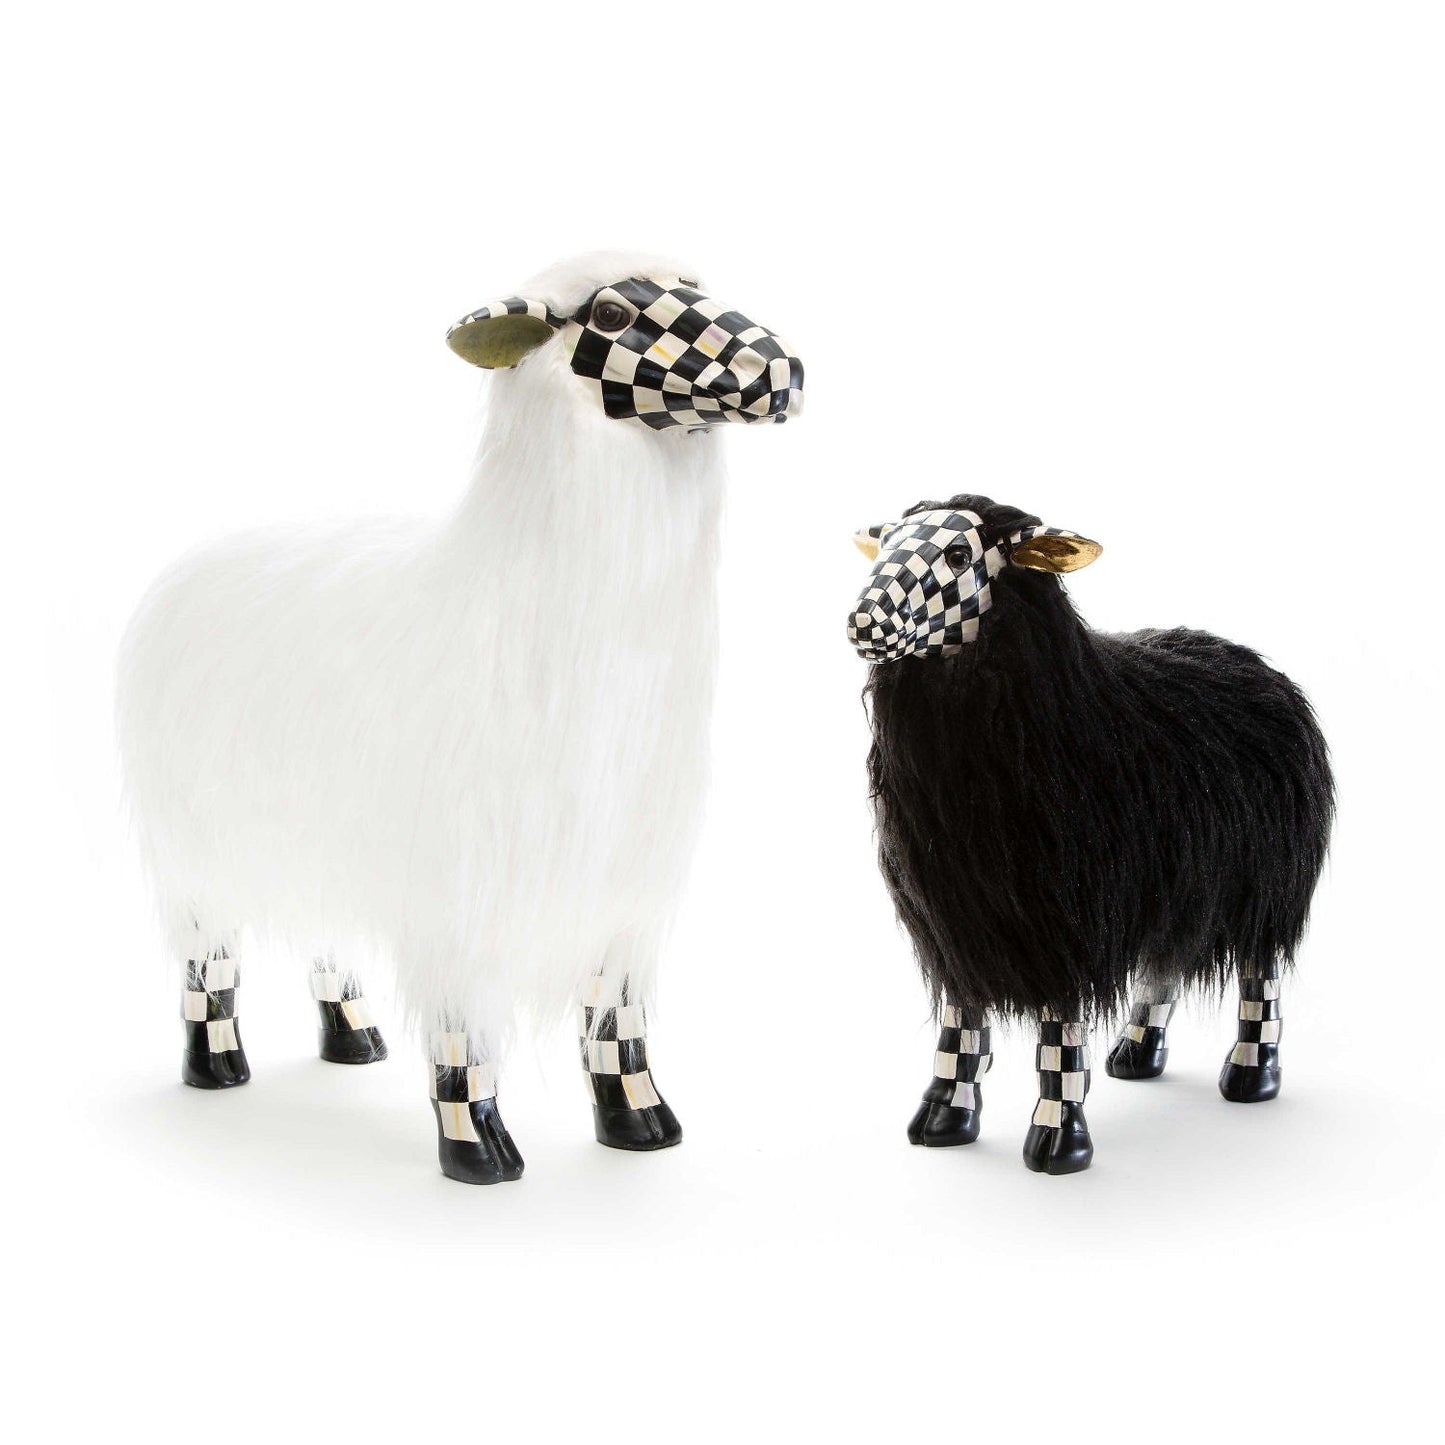 MacKenzie - Childs Courtly Check White Sheep - Large - |VESIMI Design| Luxury Bathrooms and Home Decor